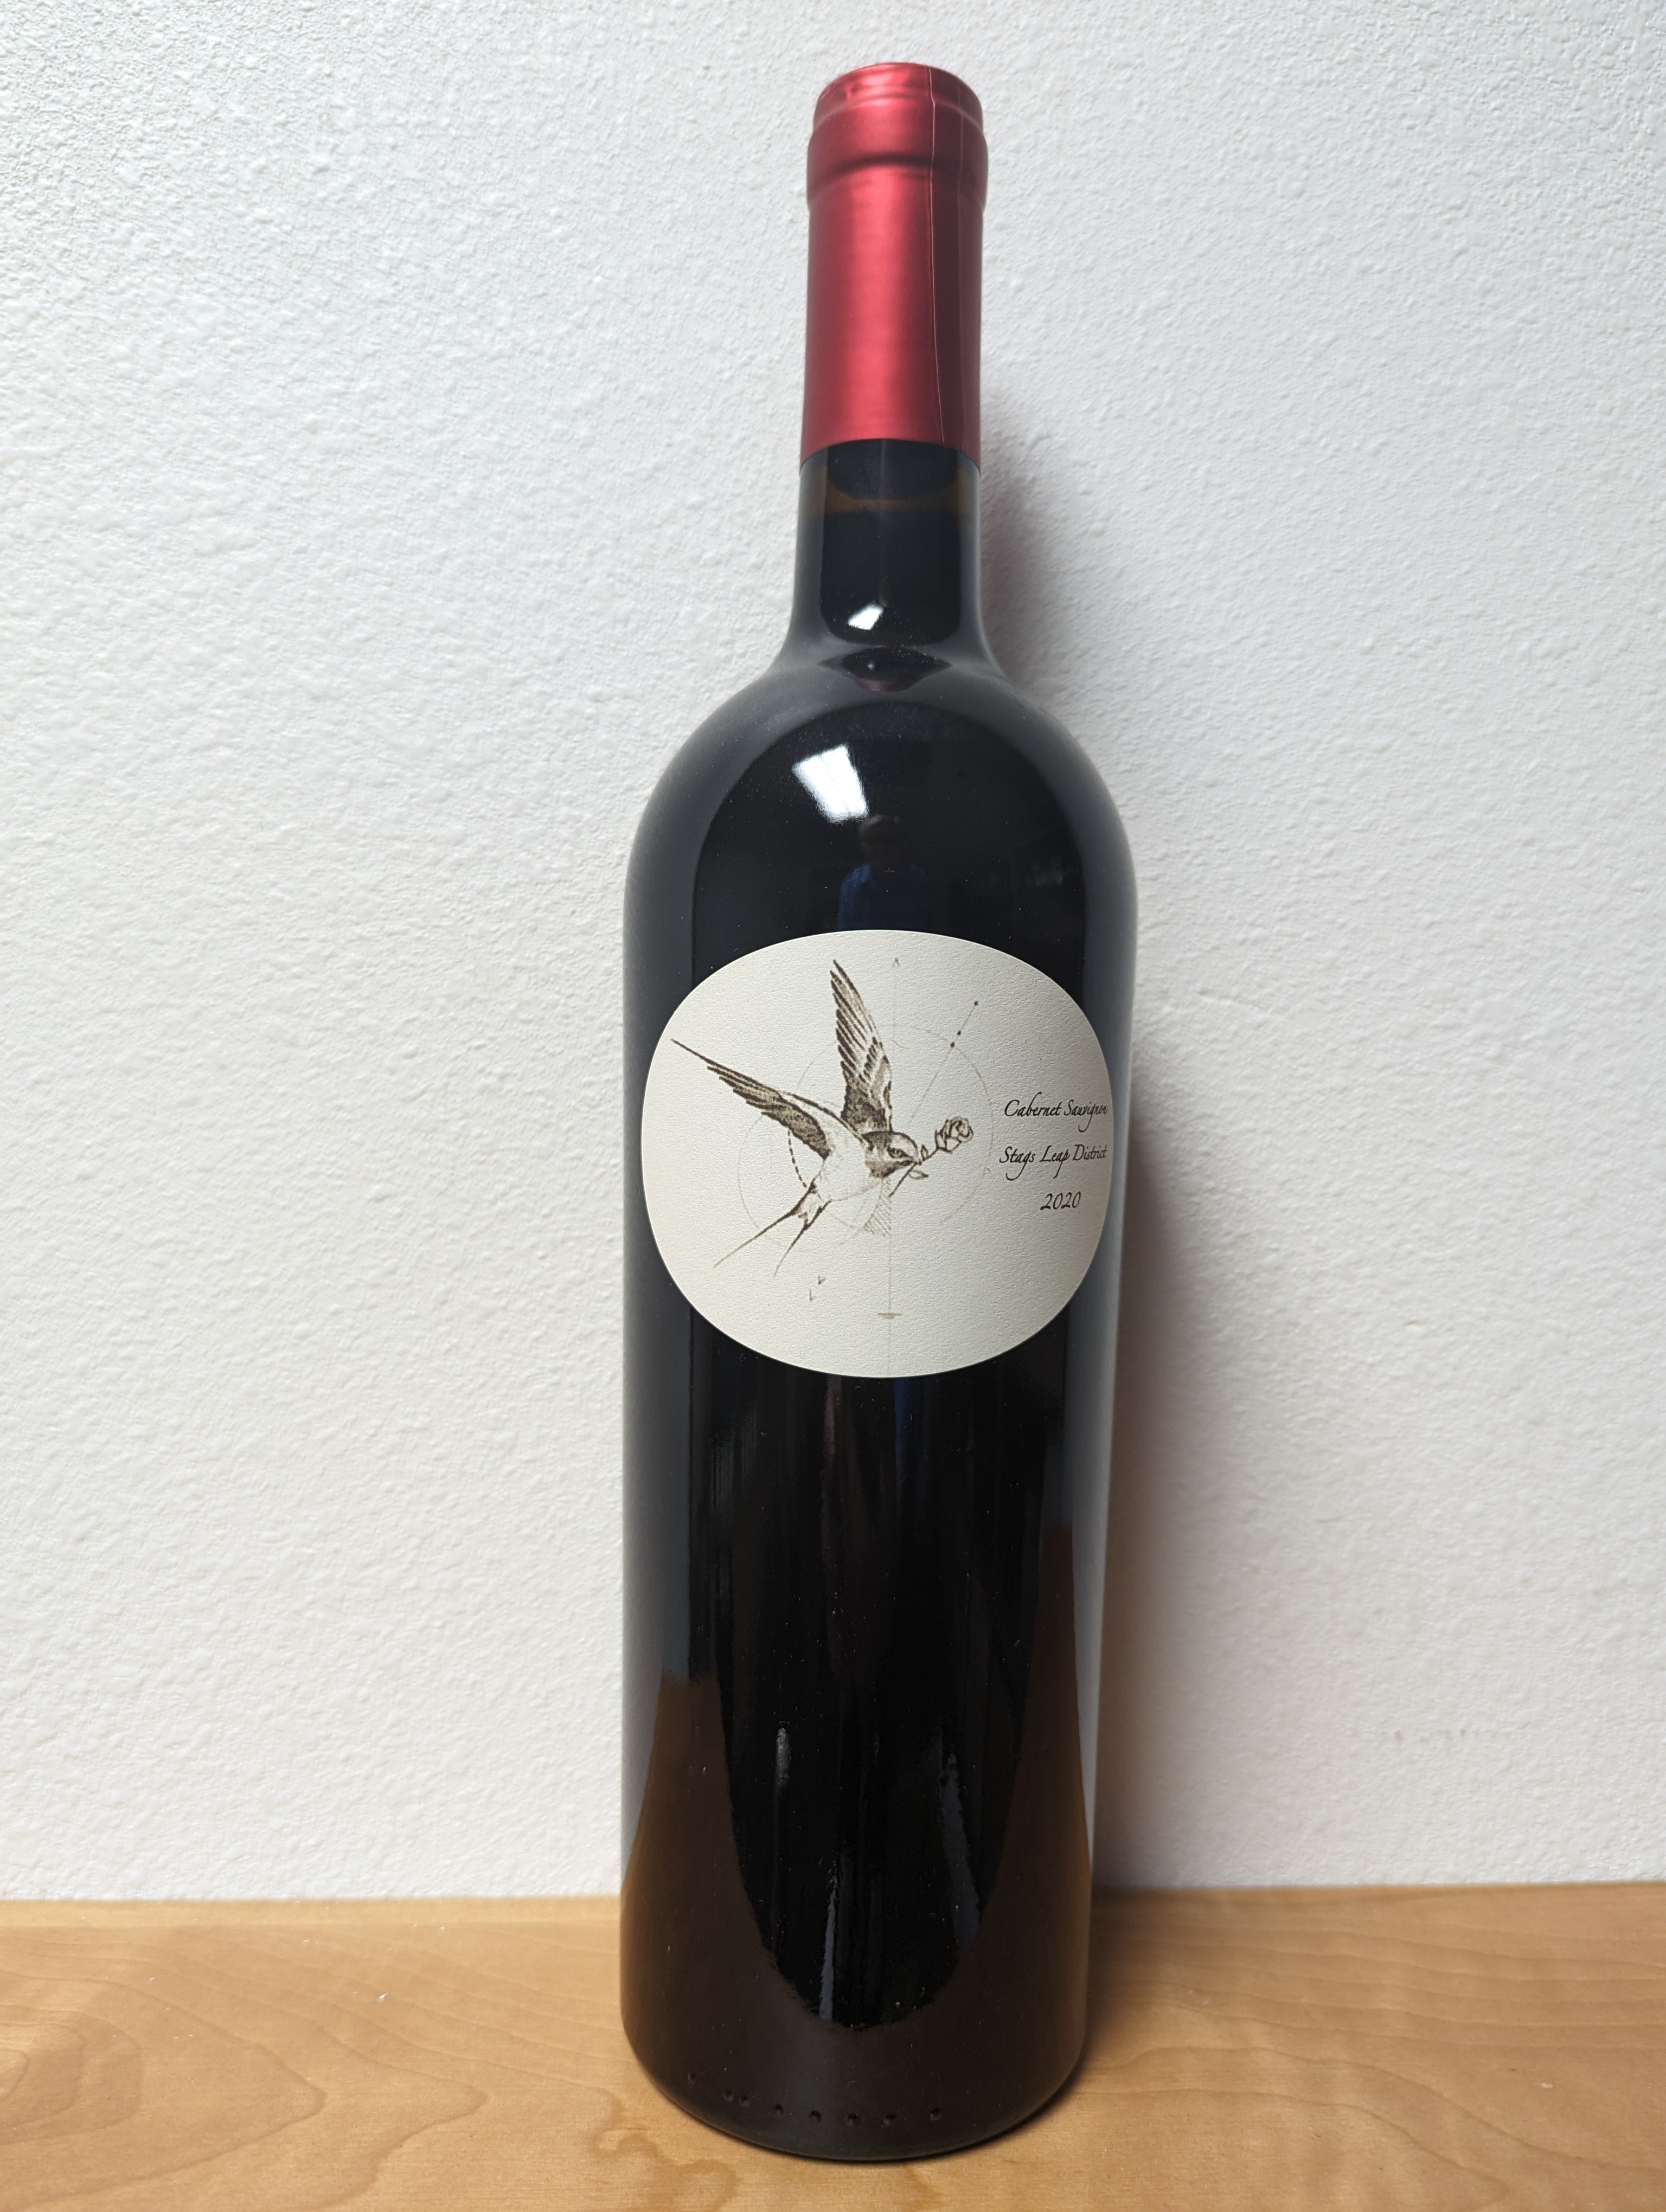 2020 Thread Feathers Stag's Leap District Cabernet